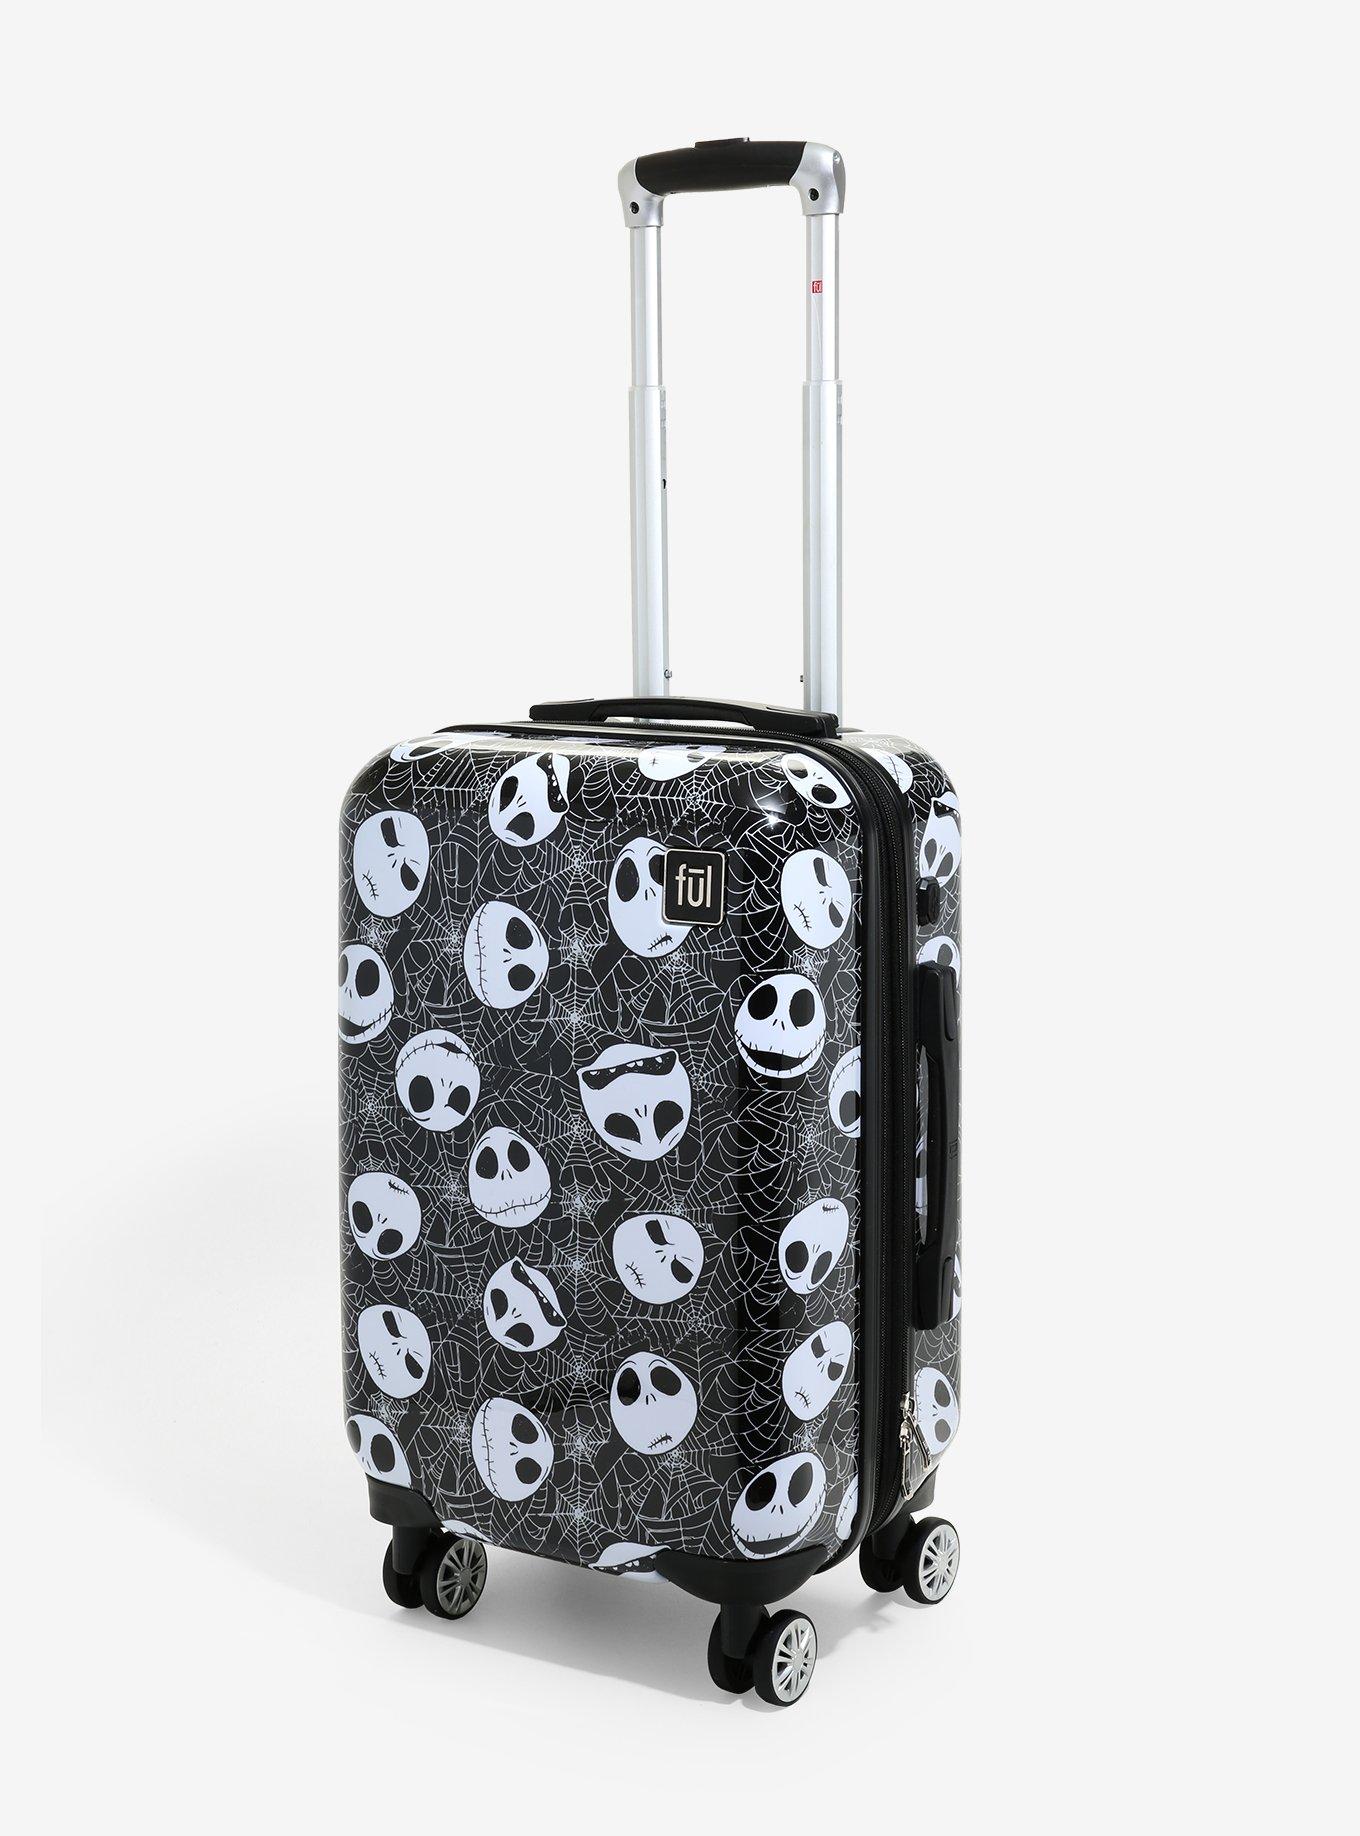 FUL The Nightmare Before Christmas Jack Head Hard-Sided 21 Inch Carry-On Rolling Luggage, , hi-res